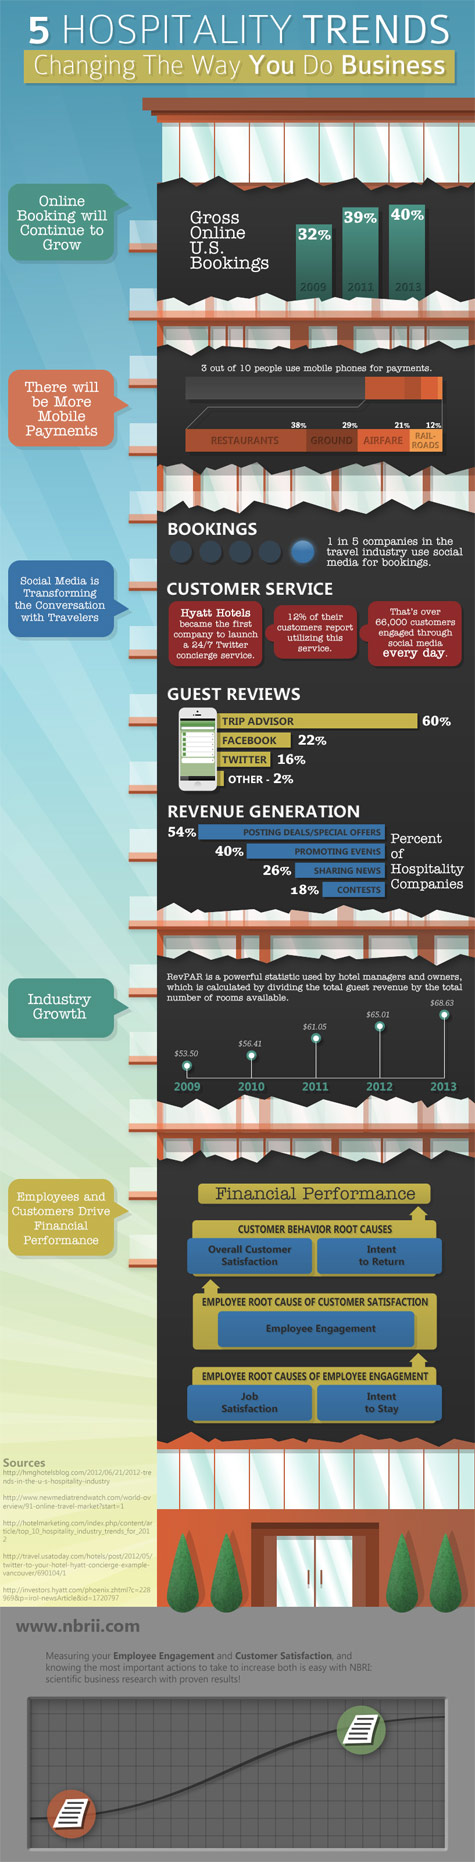 five hospitality trends infographic cutoff 475